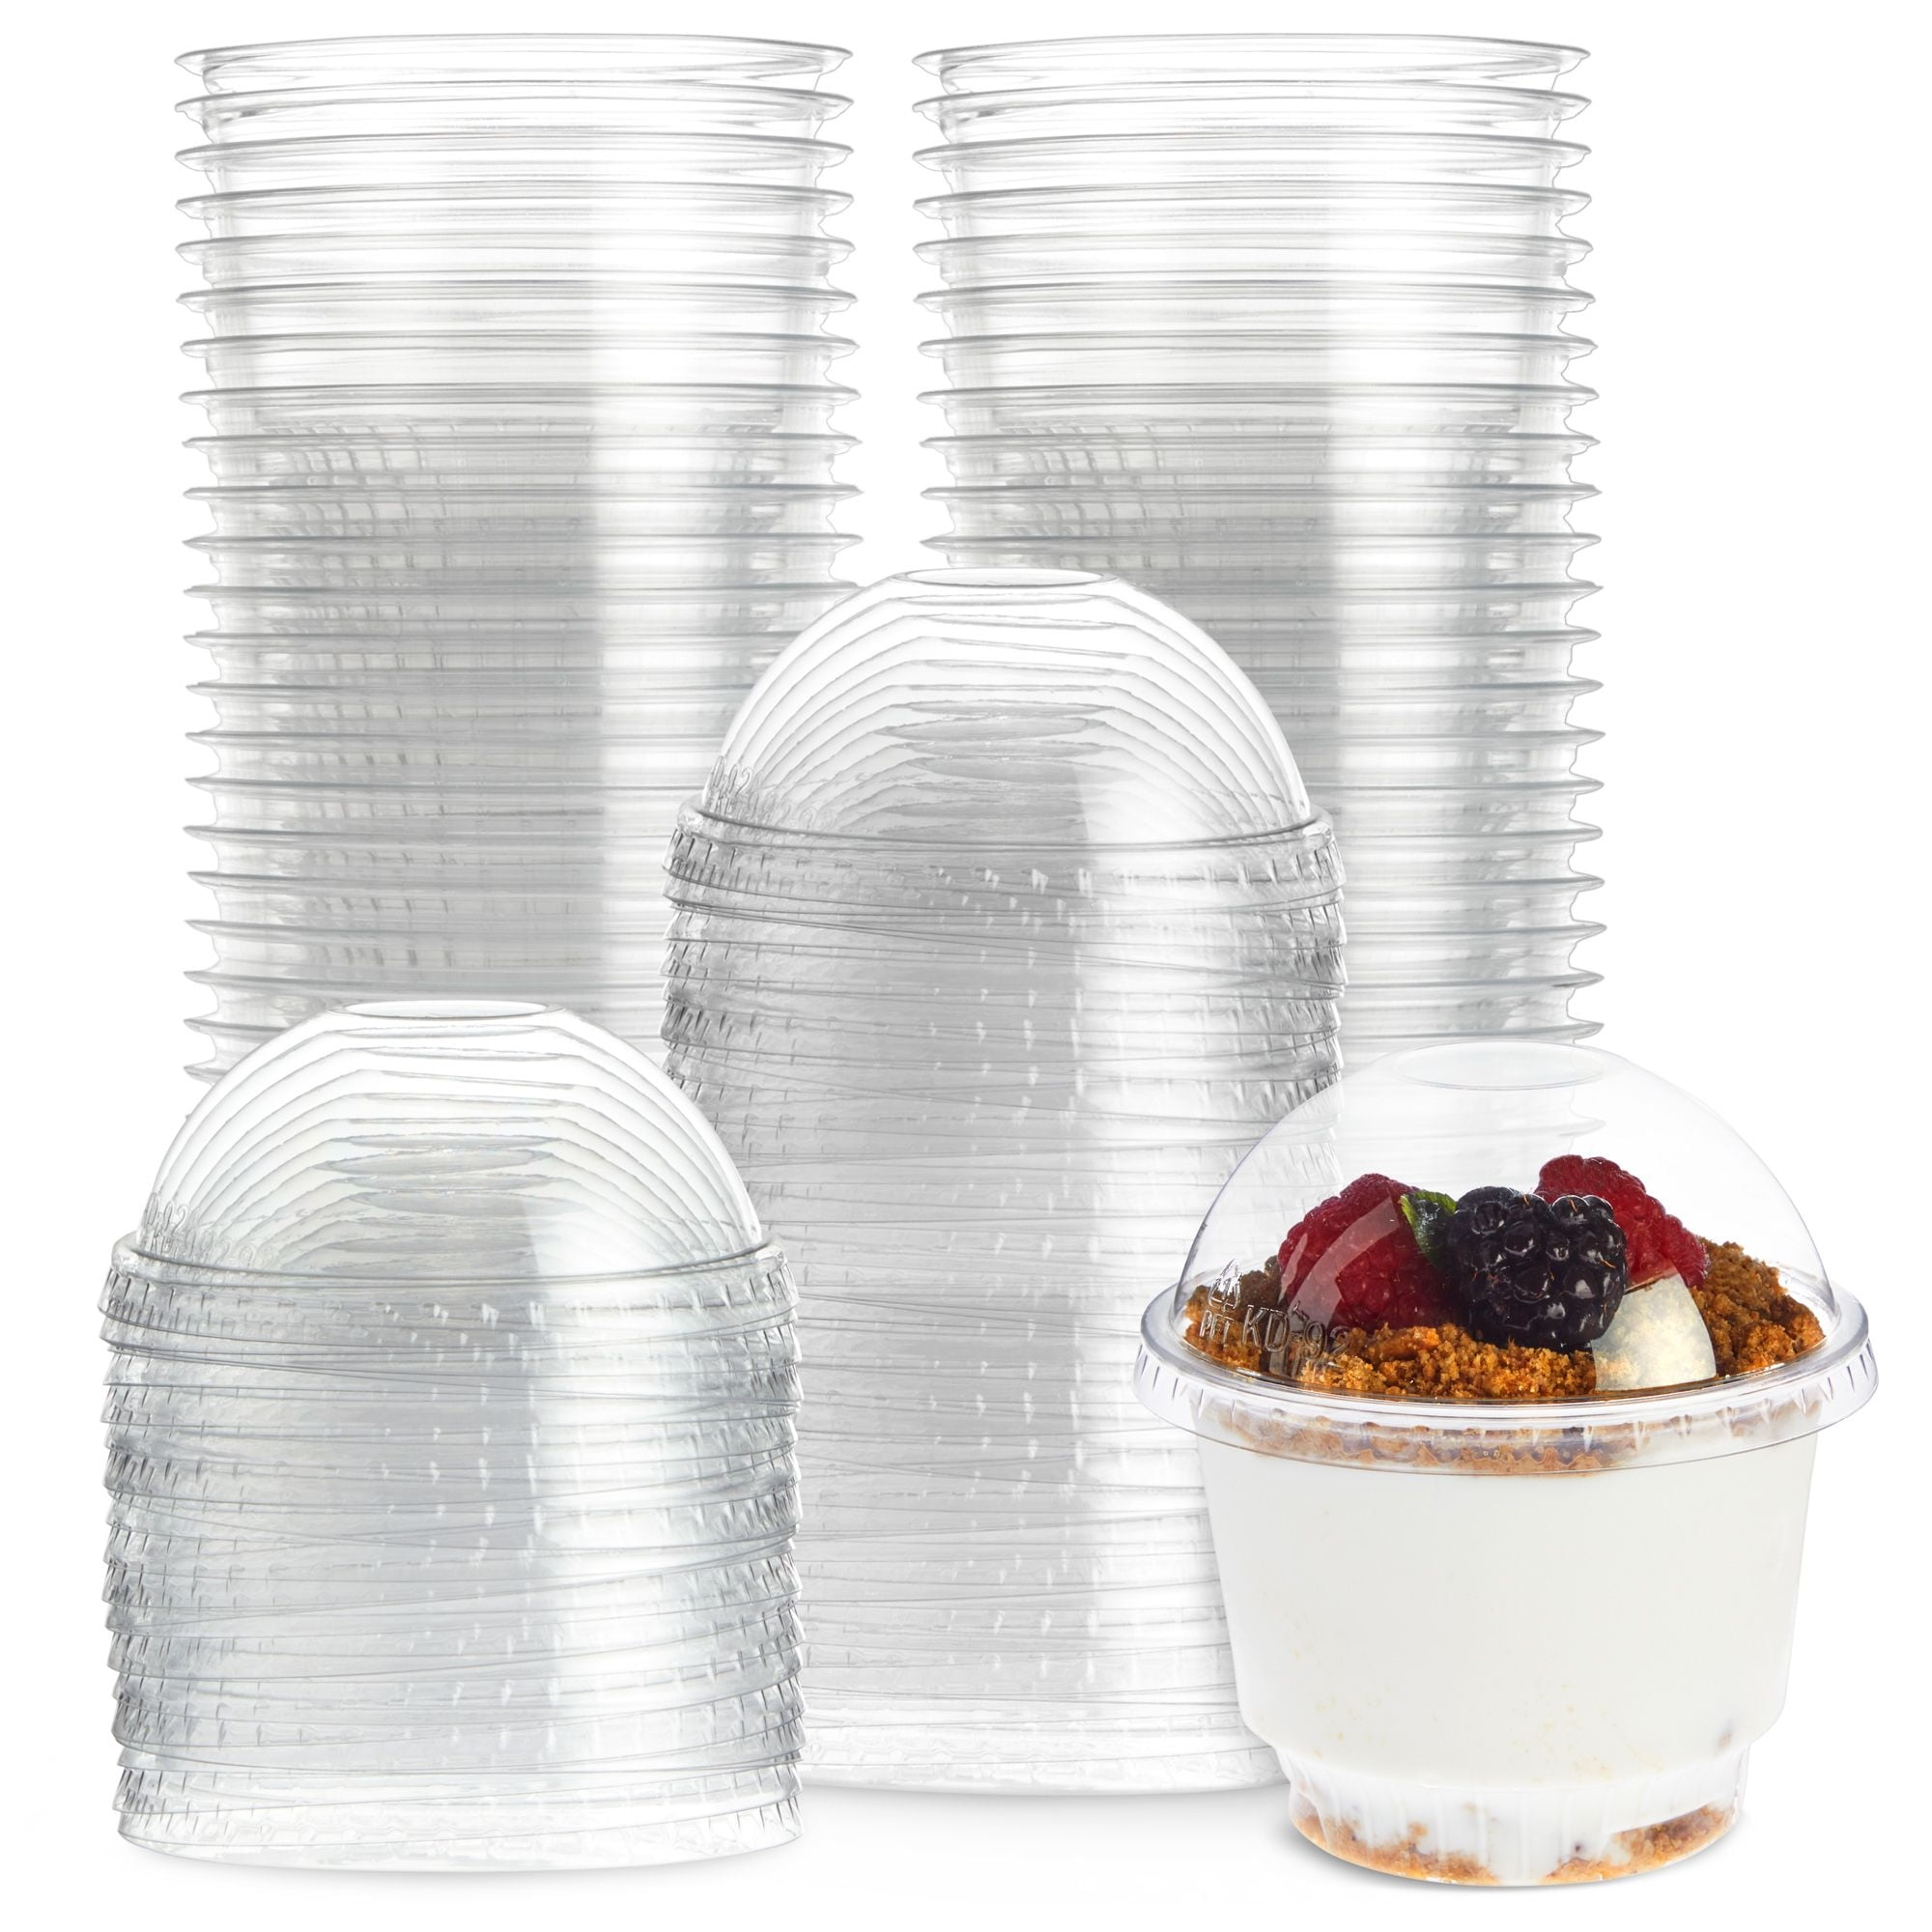 Walfront 4 oz Disposable Cups with Lids, 50pcs Plastic Clear Chutney Sauce Cups Food Takeaway Hot Souffle Portion Container Cups, Size: 4 oz